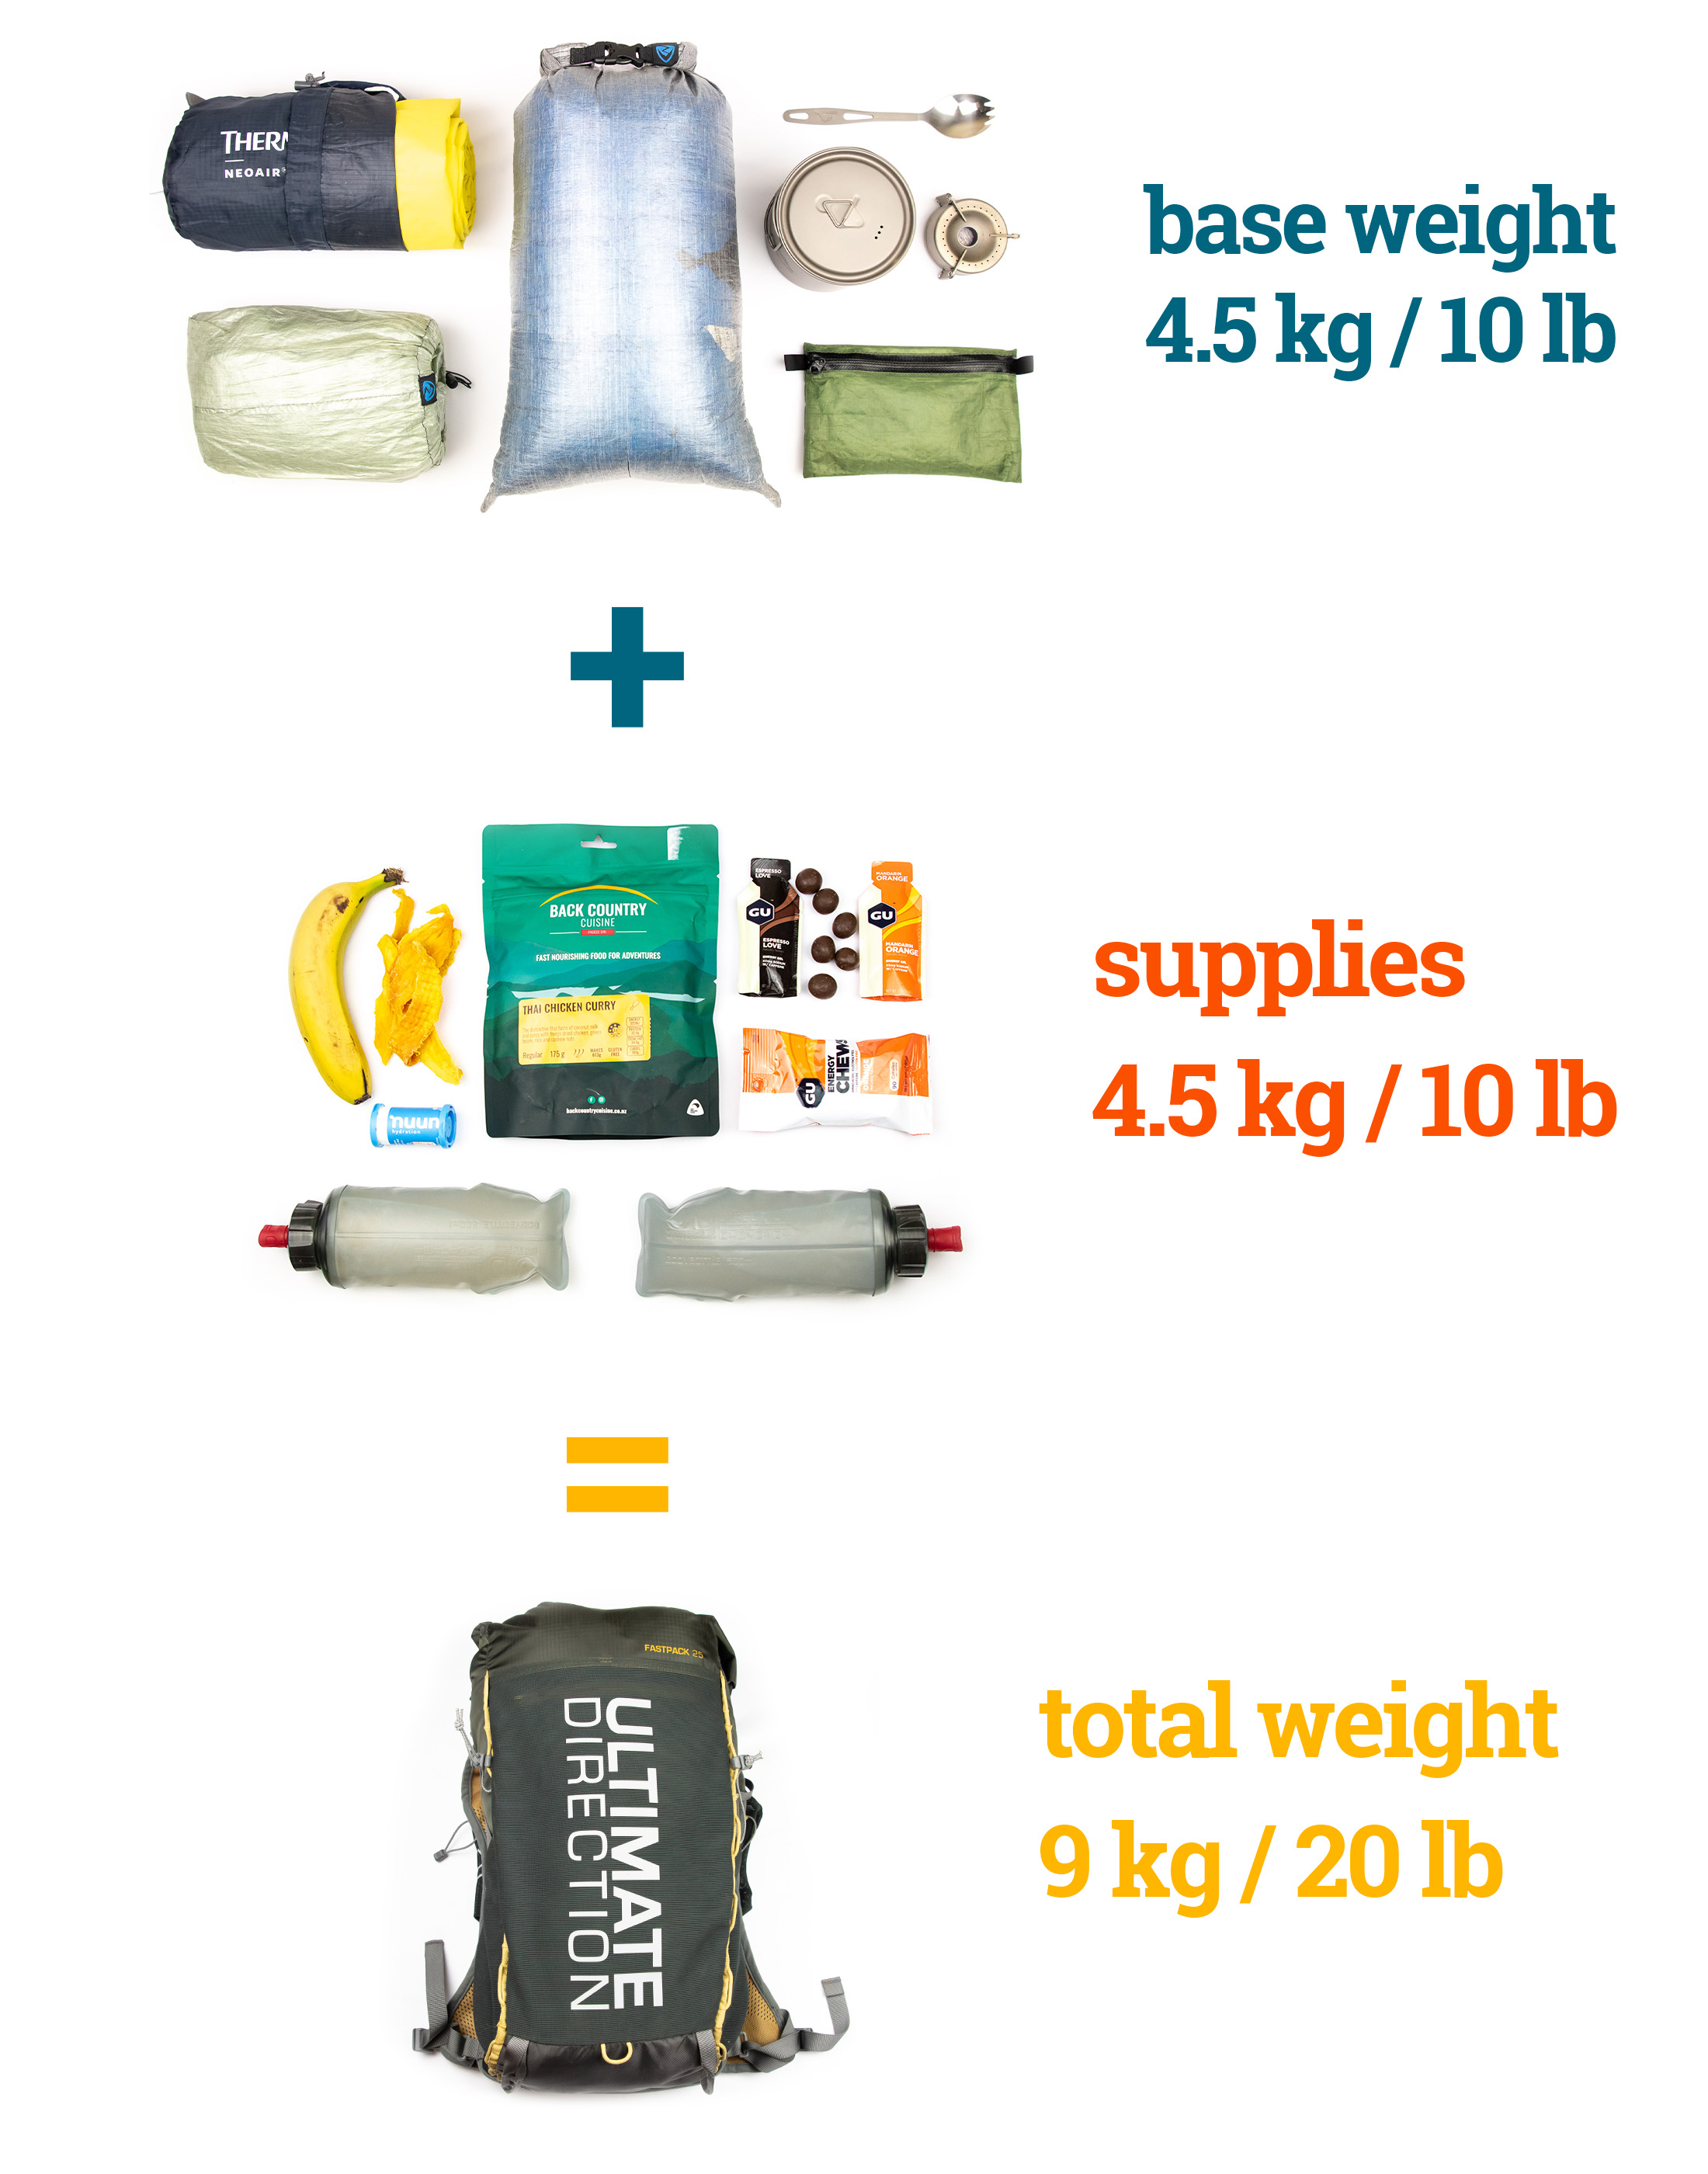 kit with a base weight of 9 kg